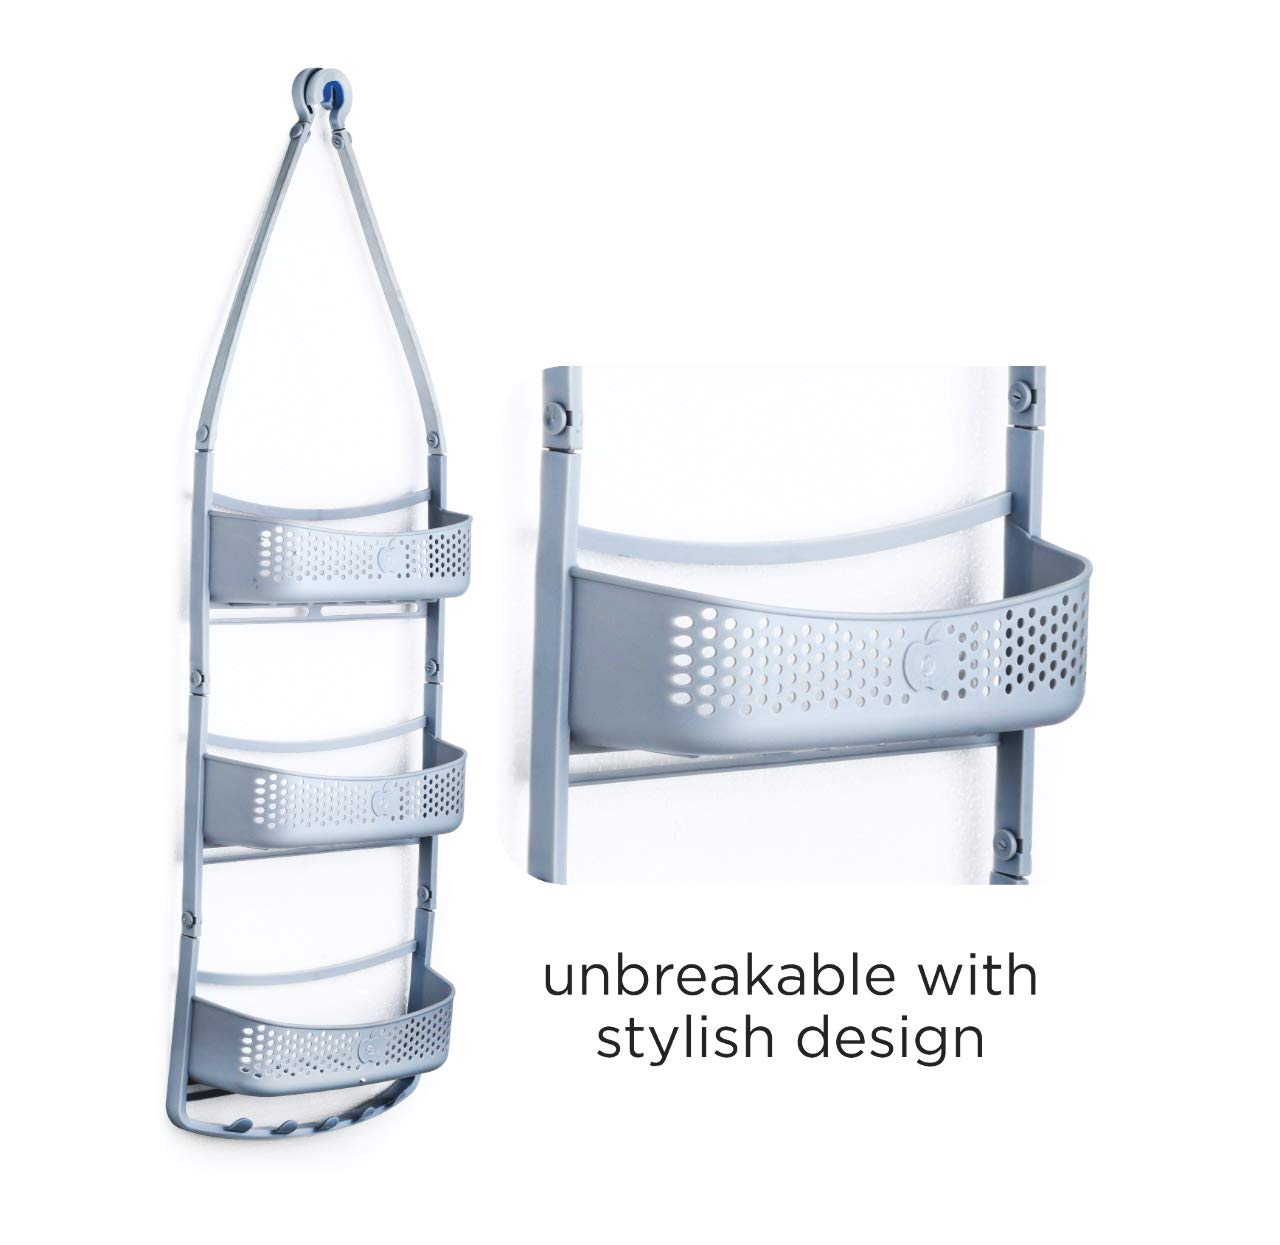 Machak Hanging Shower Caddy Organiser Hanger With Adjustable Arms For Bathroom (3 Layer, Grey)